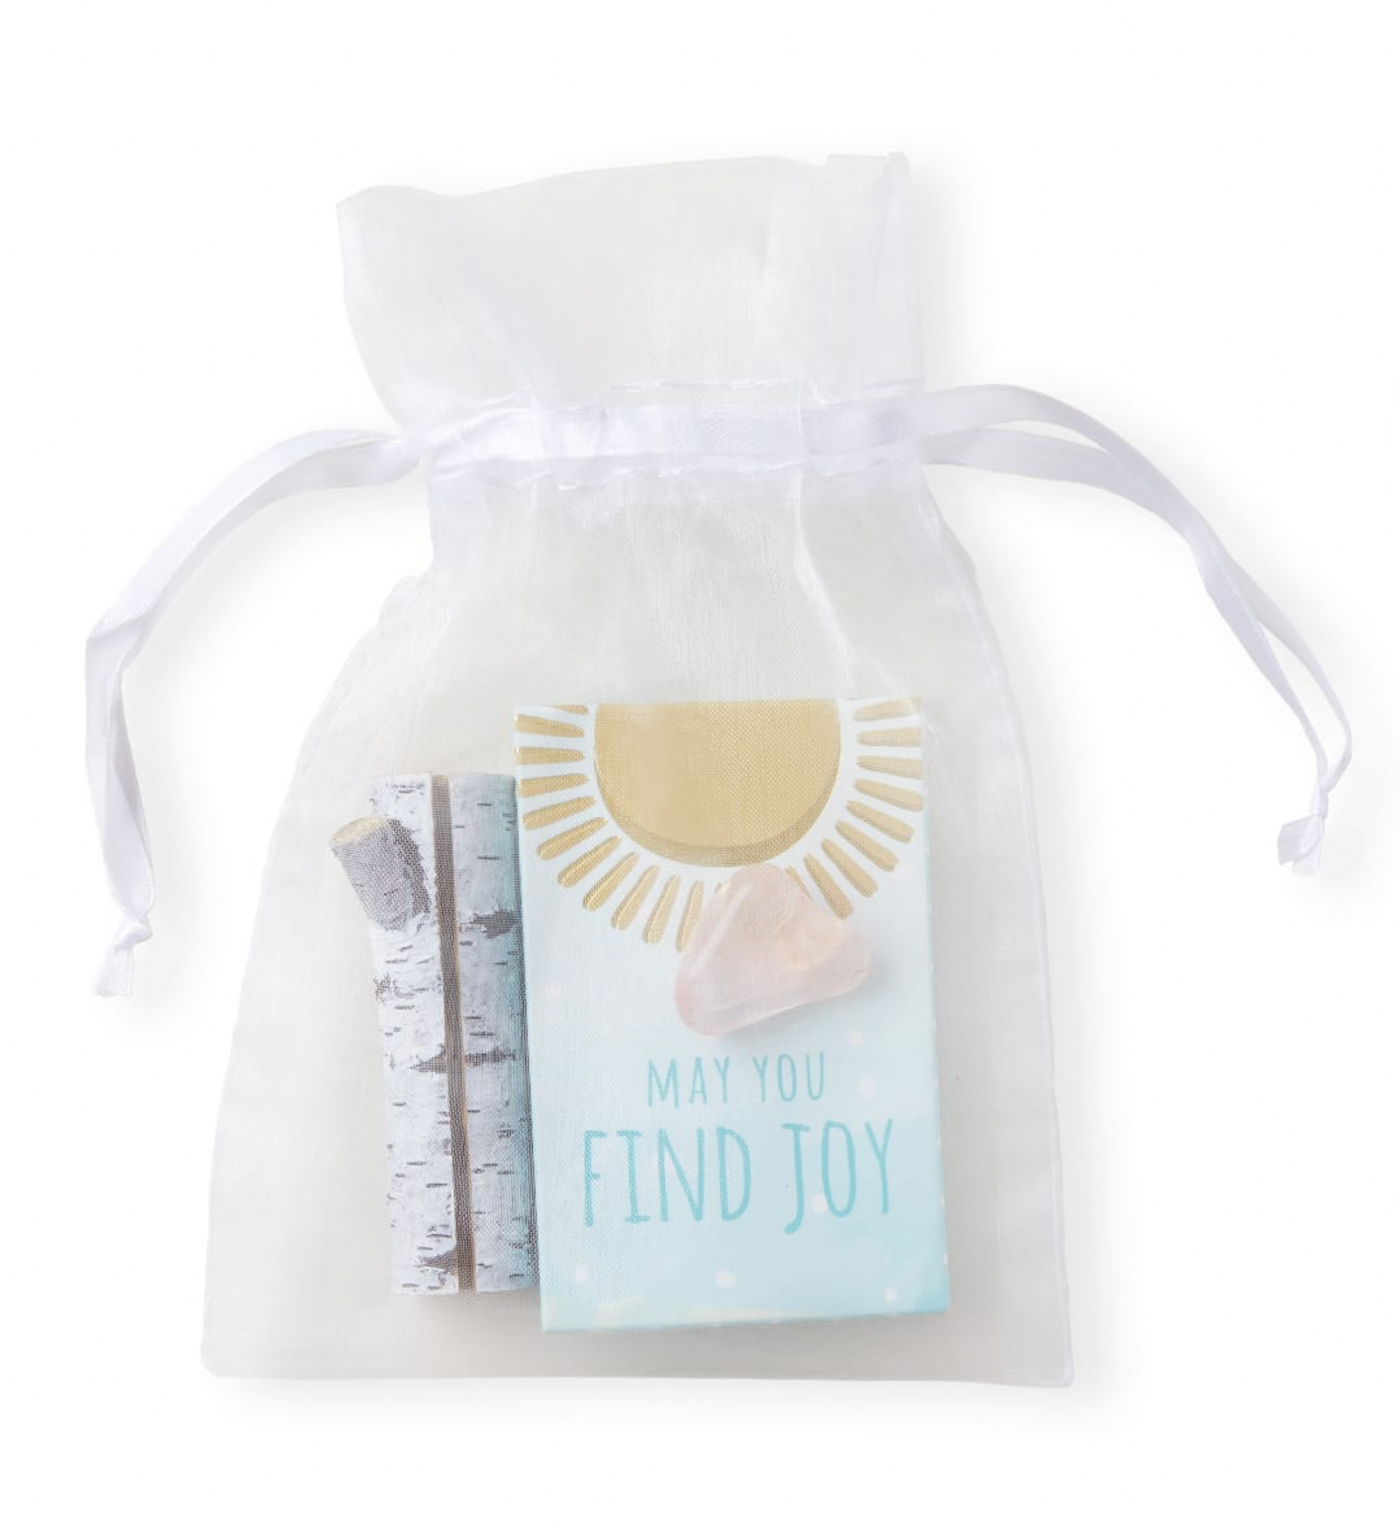 May You Find Joy – Daily Intention Card Deck - Deluxe